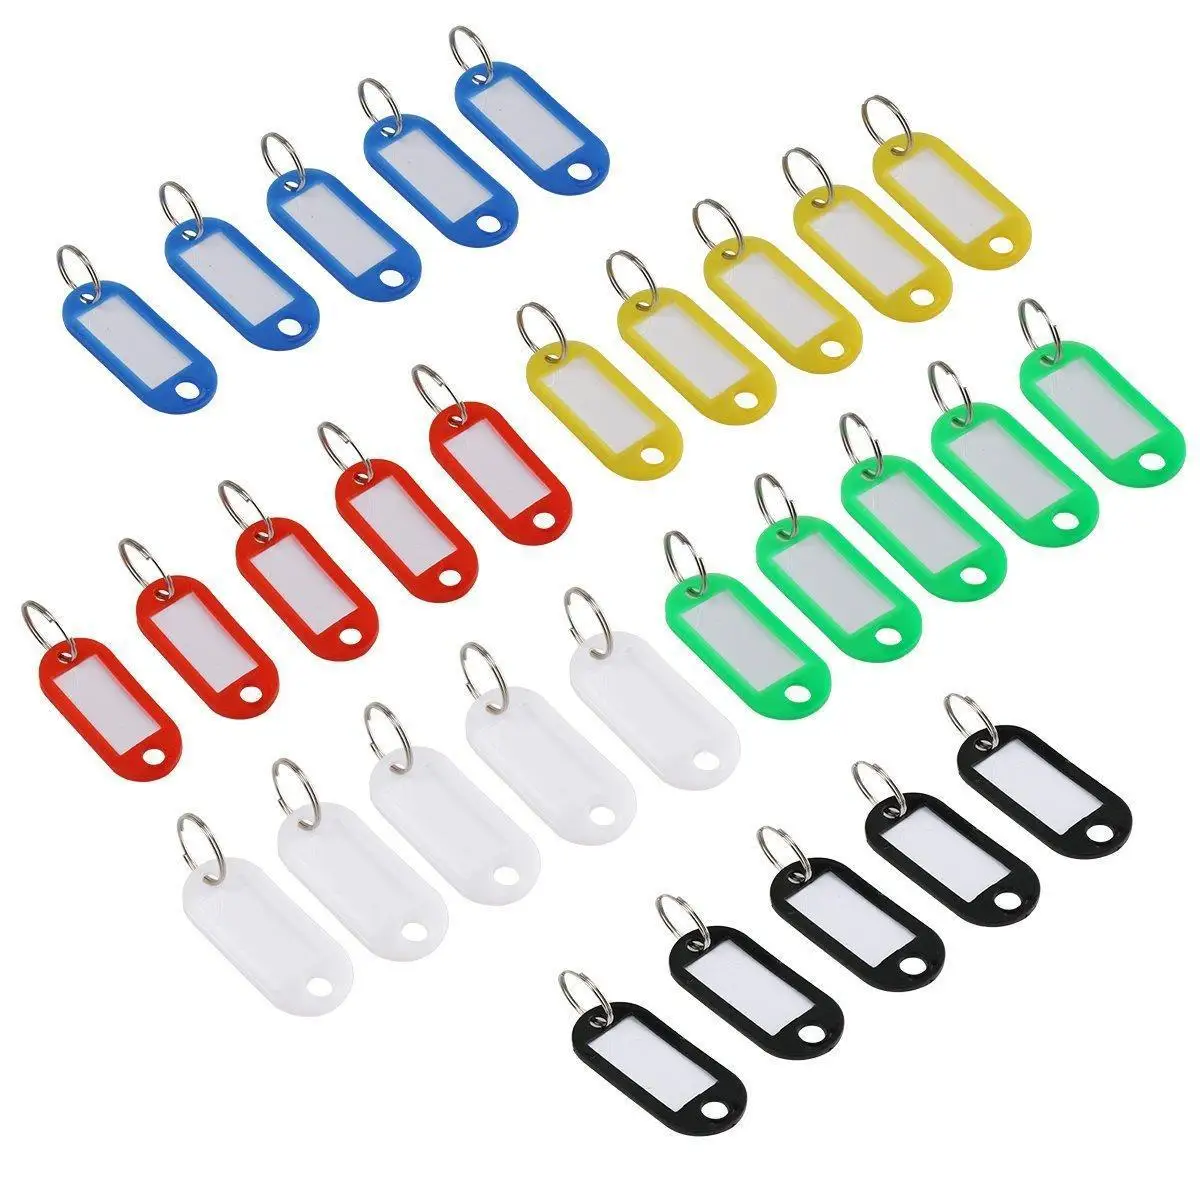 30x Assorted Colors Plastic Keychain Rings ID Luggage Name Tag